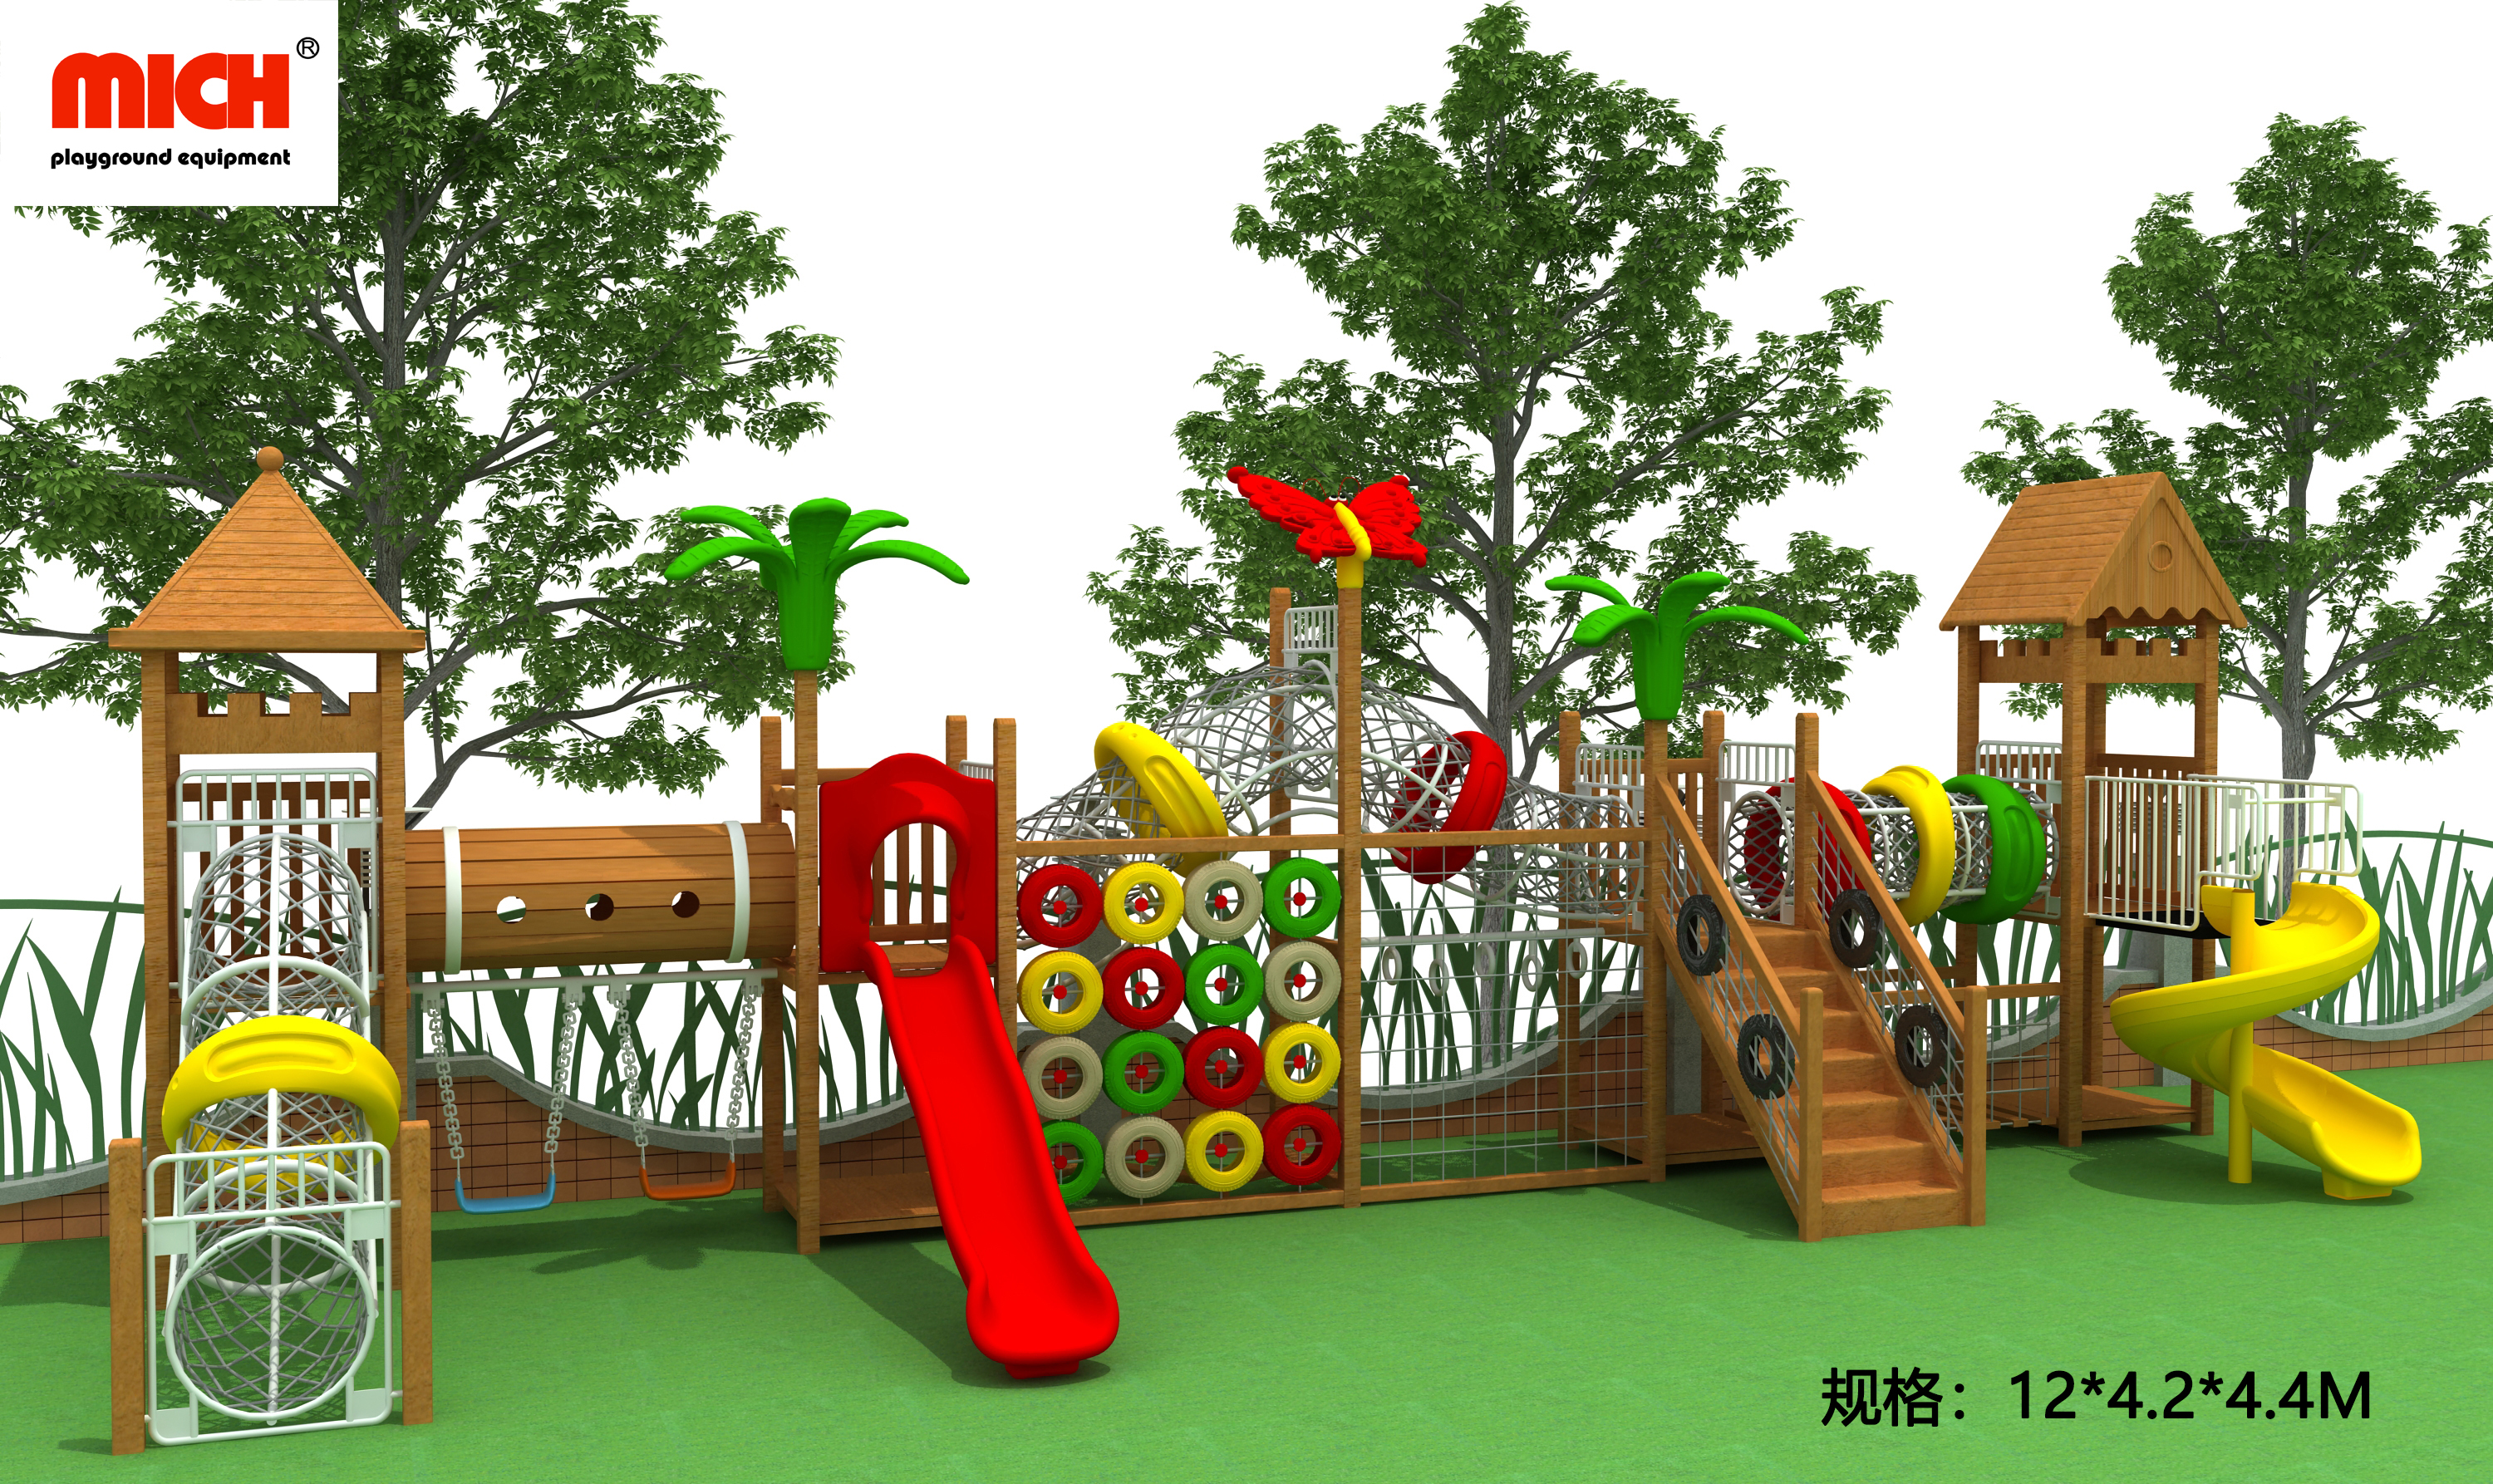 How to make better use of non-standard custom playgrounds?